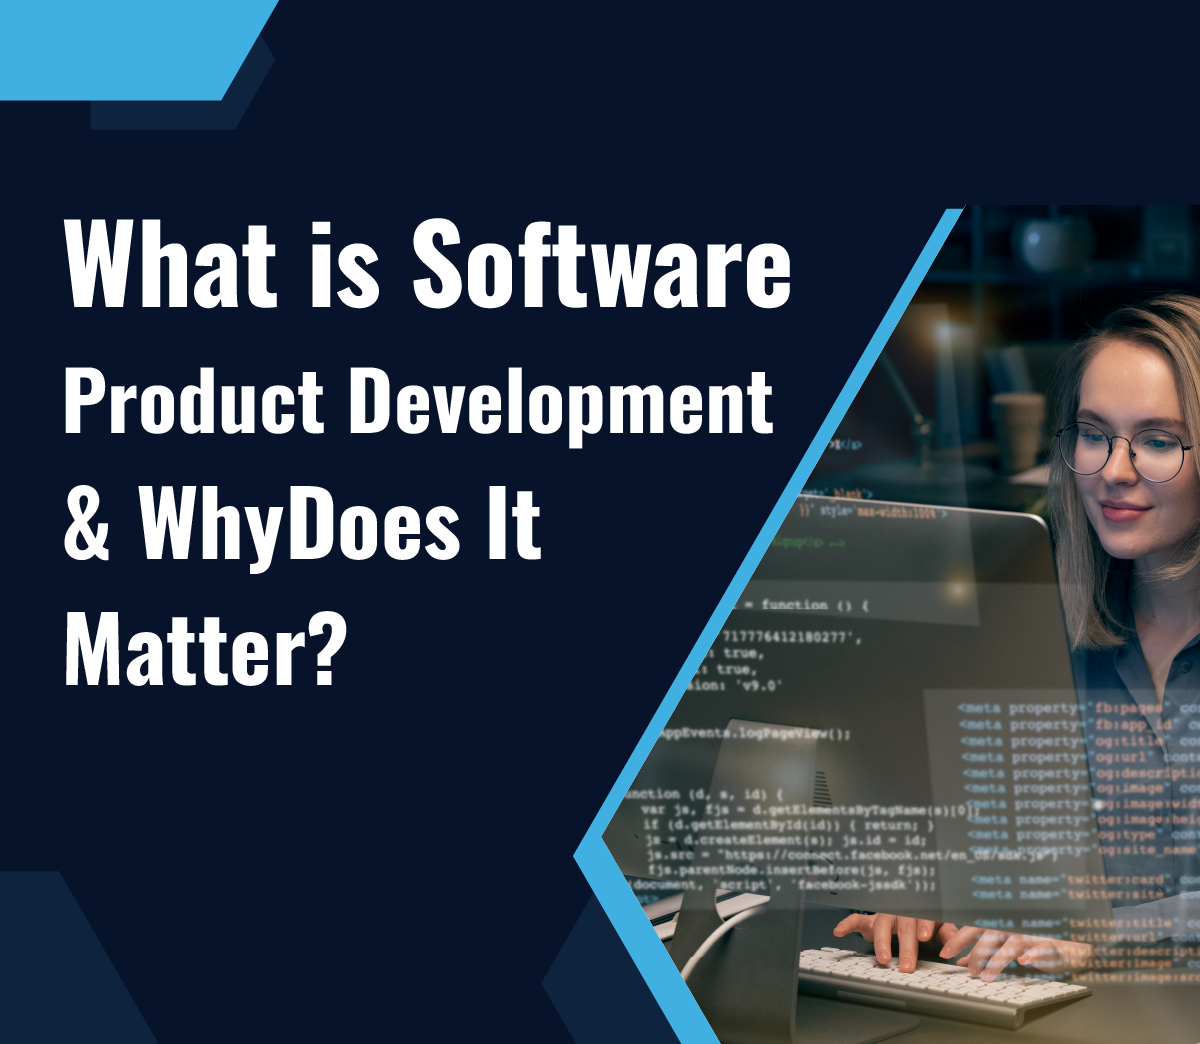 What is Software Product Development, and Why Does It Matter?